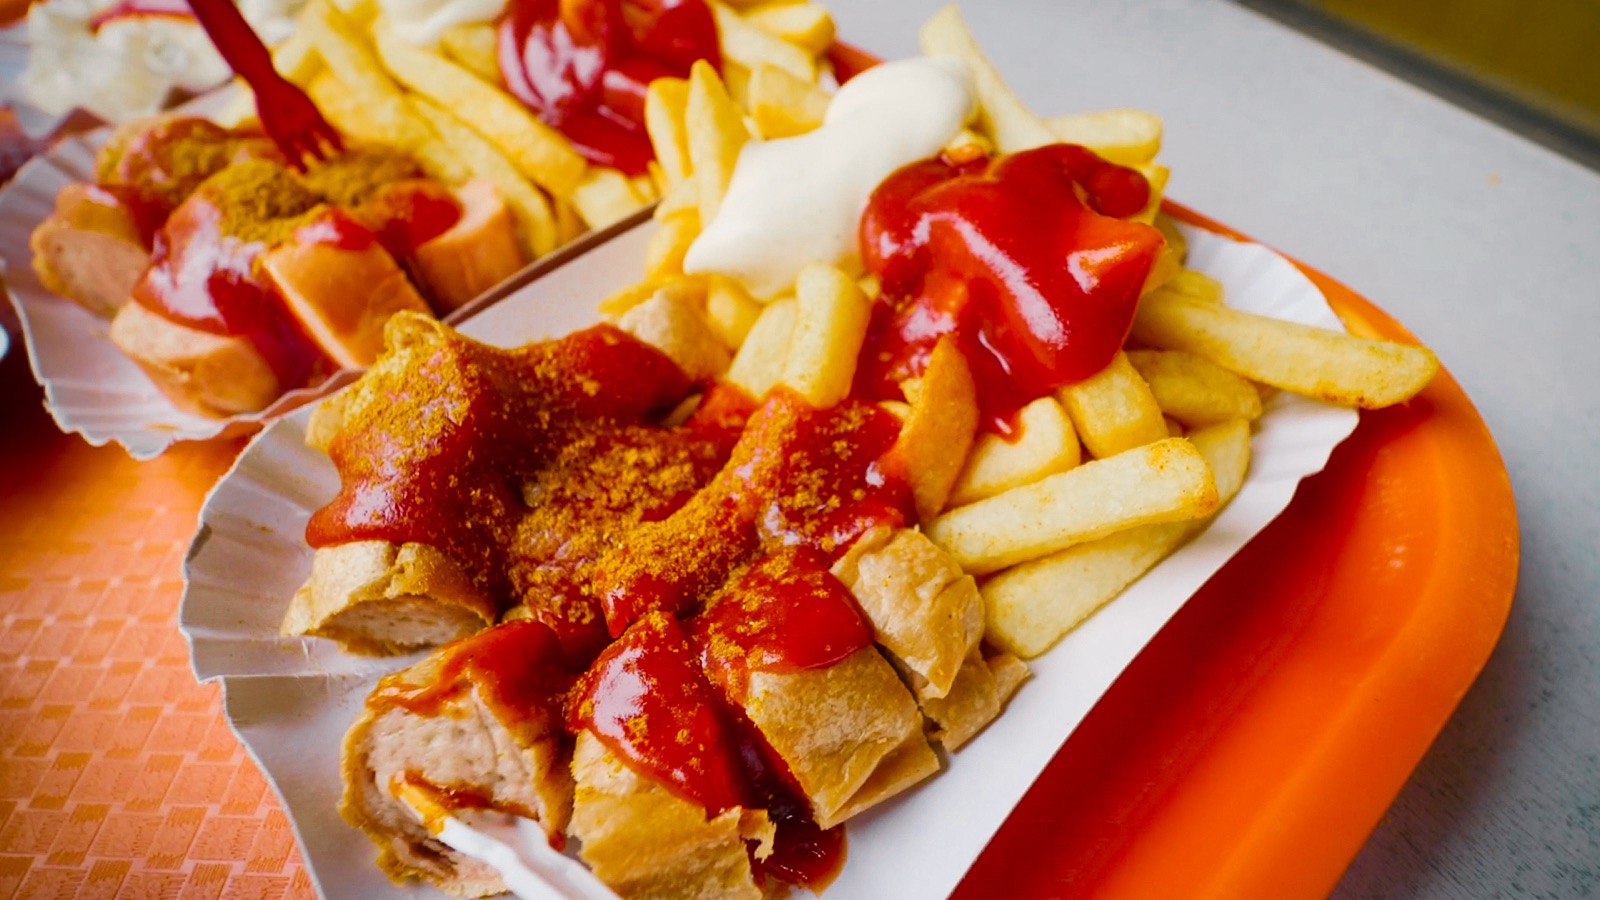 🌭 Here Are 24 Street Foods Around the World – Can You Match Them to Their Continent? Currywurst